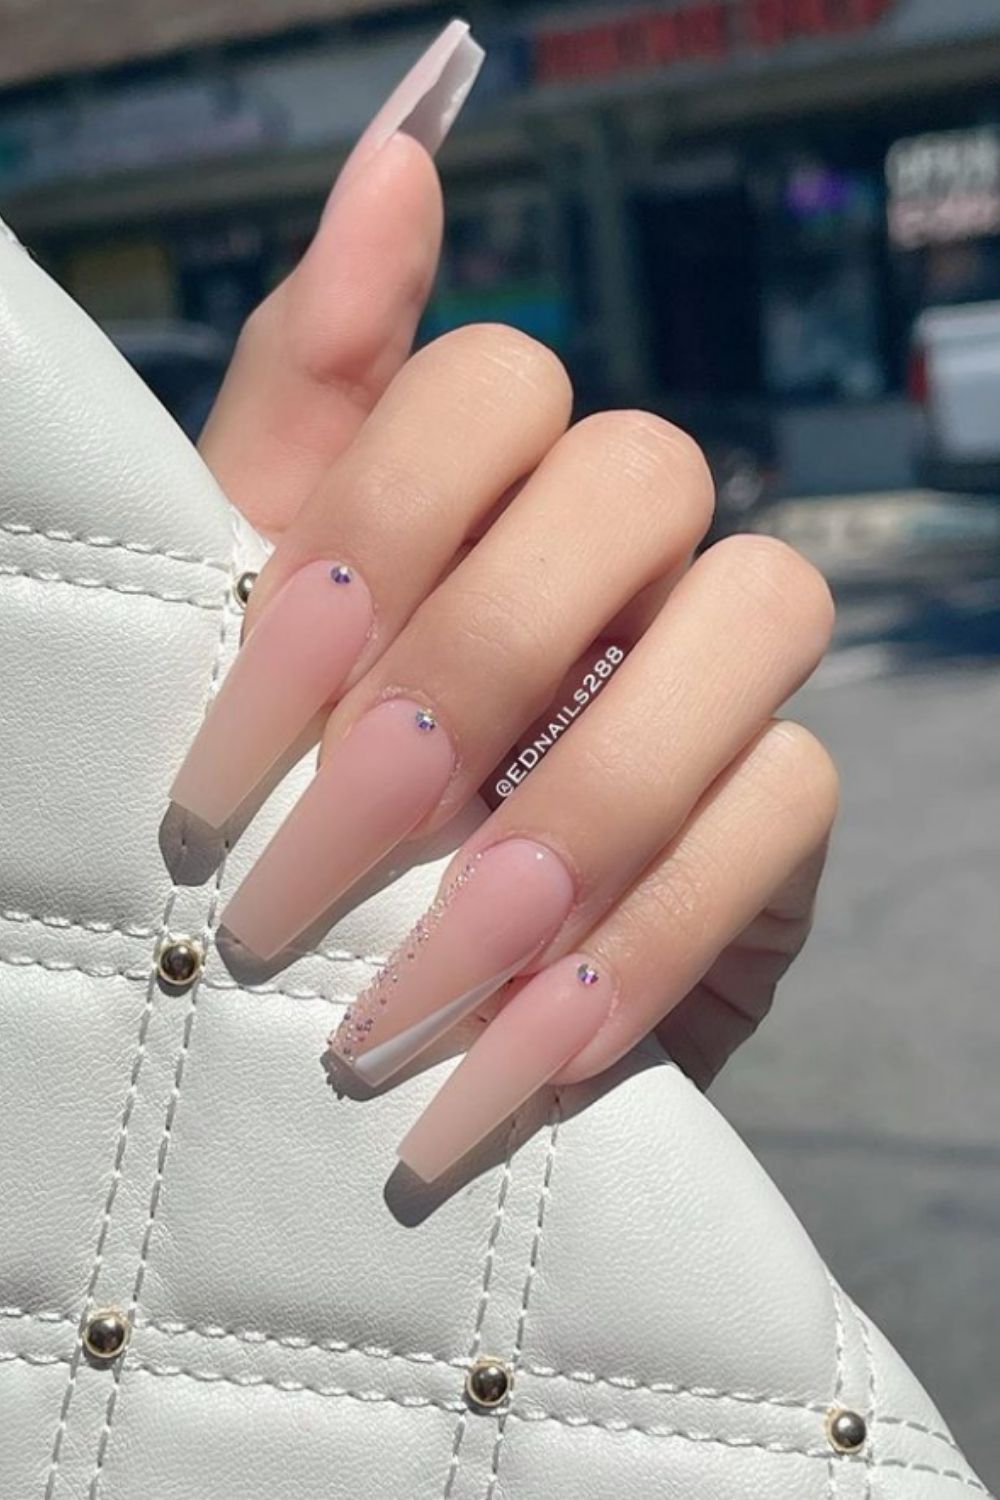 How To Shape Coffin Acrylic Nails For Summer 2021?